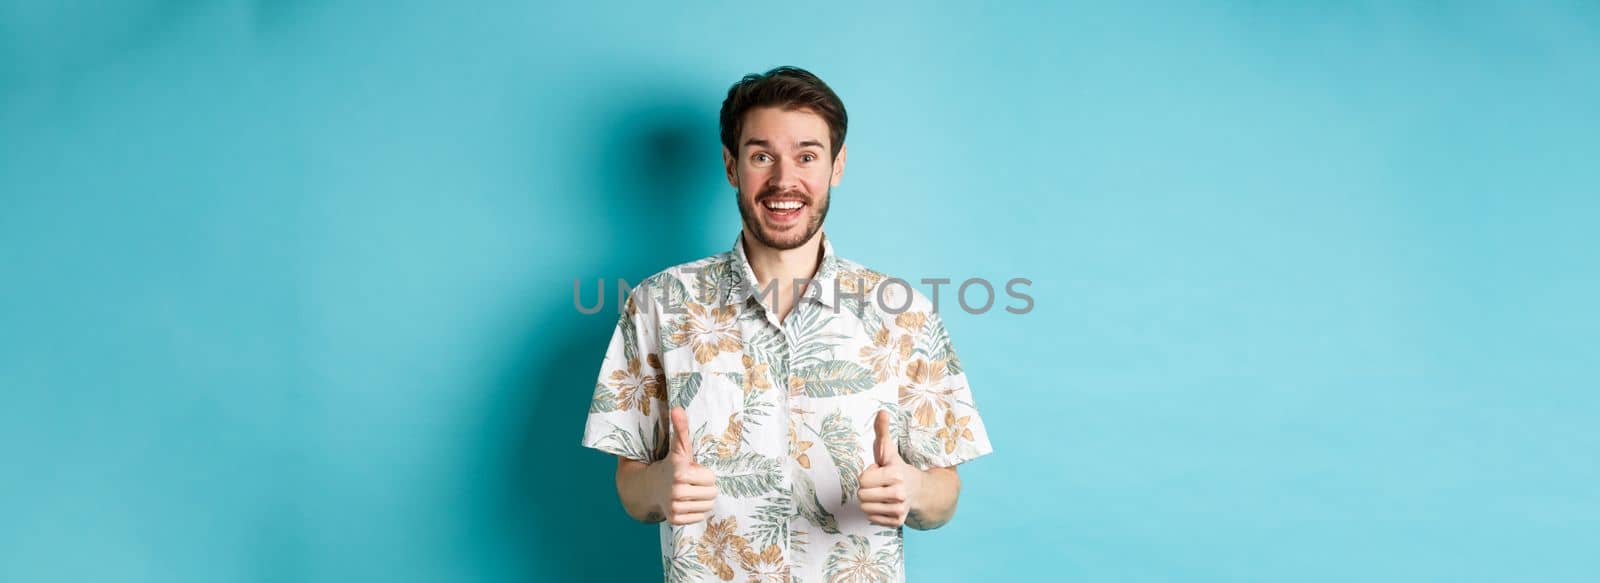 Summer holiday. Excited smiling tourist in hawaiian shirt show thumbs-up, praising hotel or vacation place, standing on blue background.